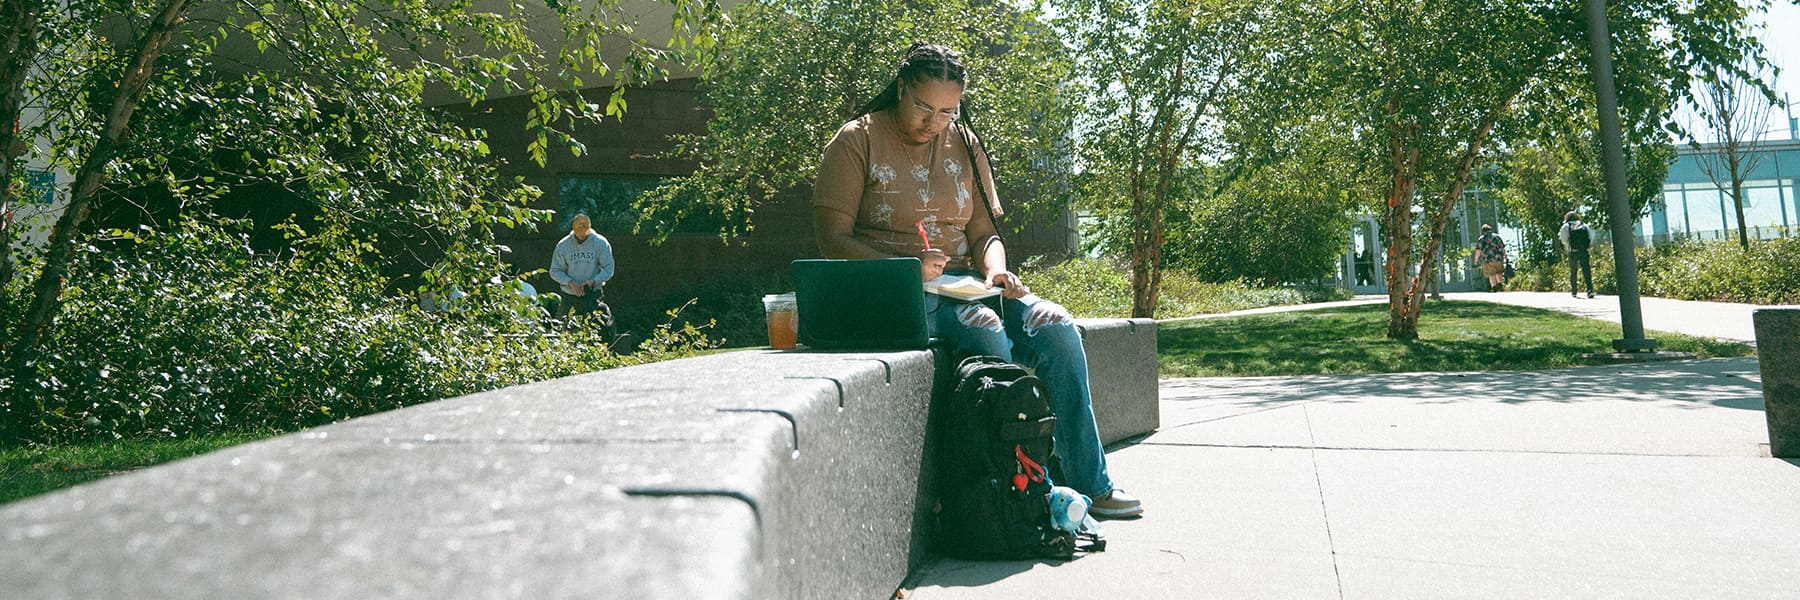 Student does homework outside sitting on a bench on campus.